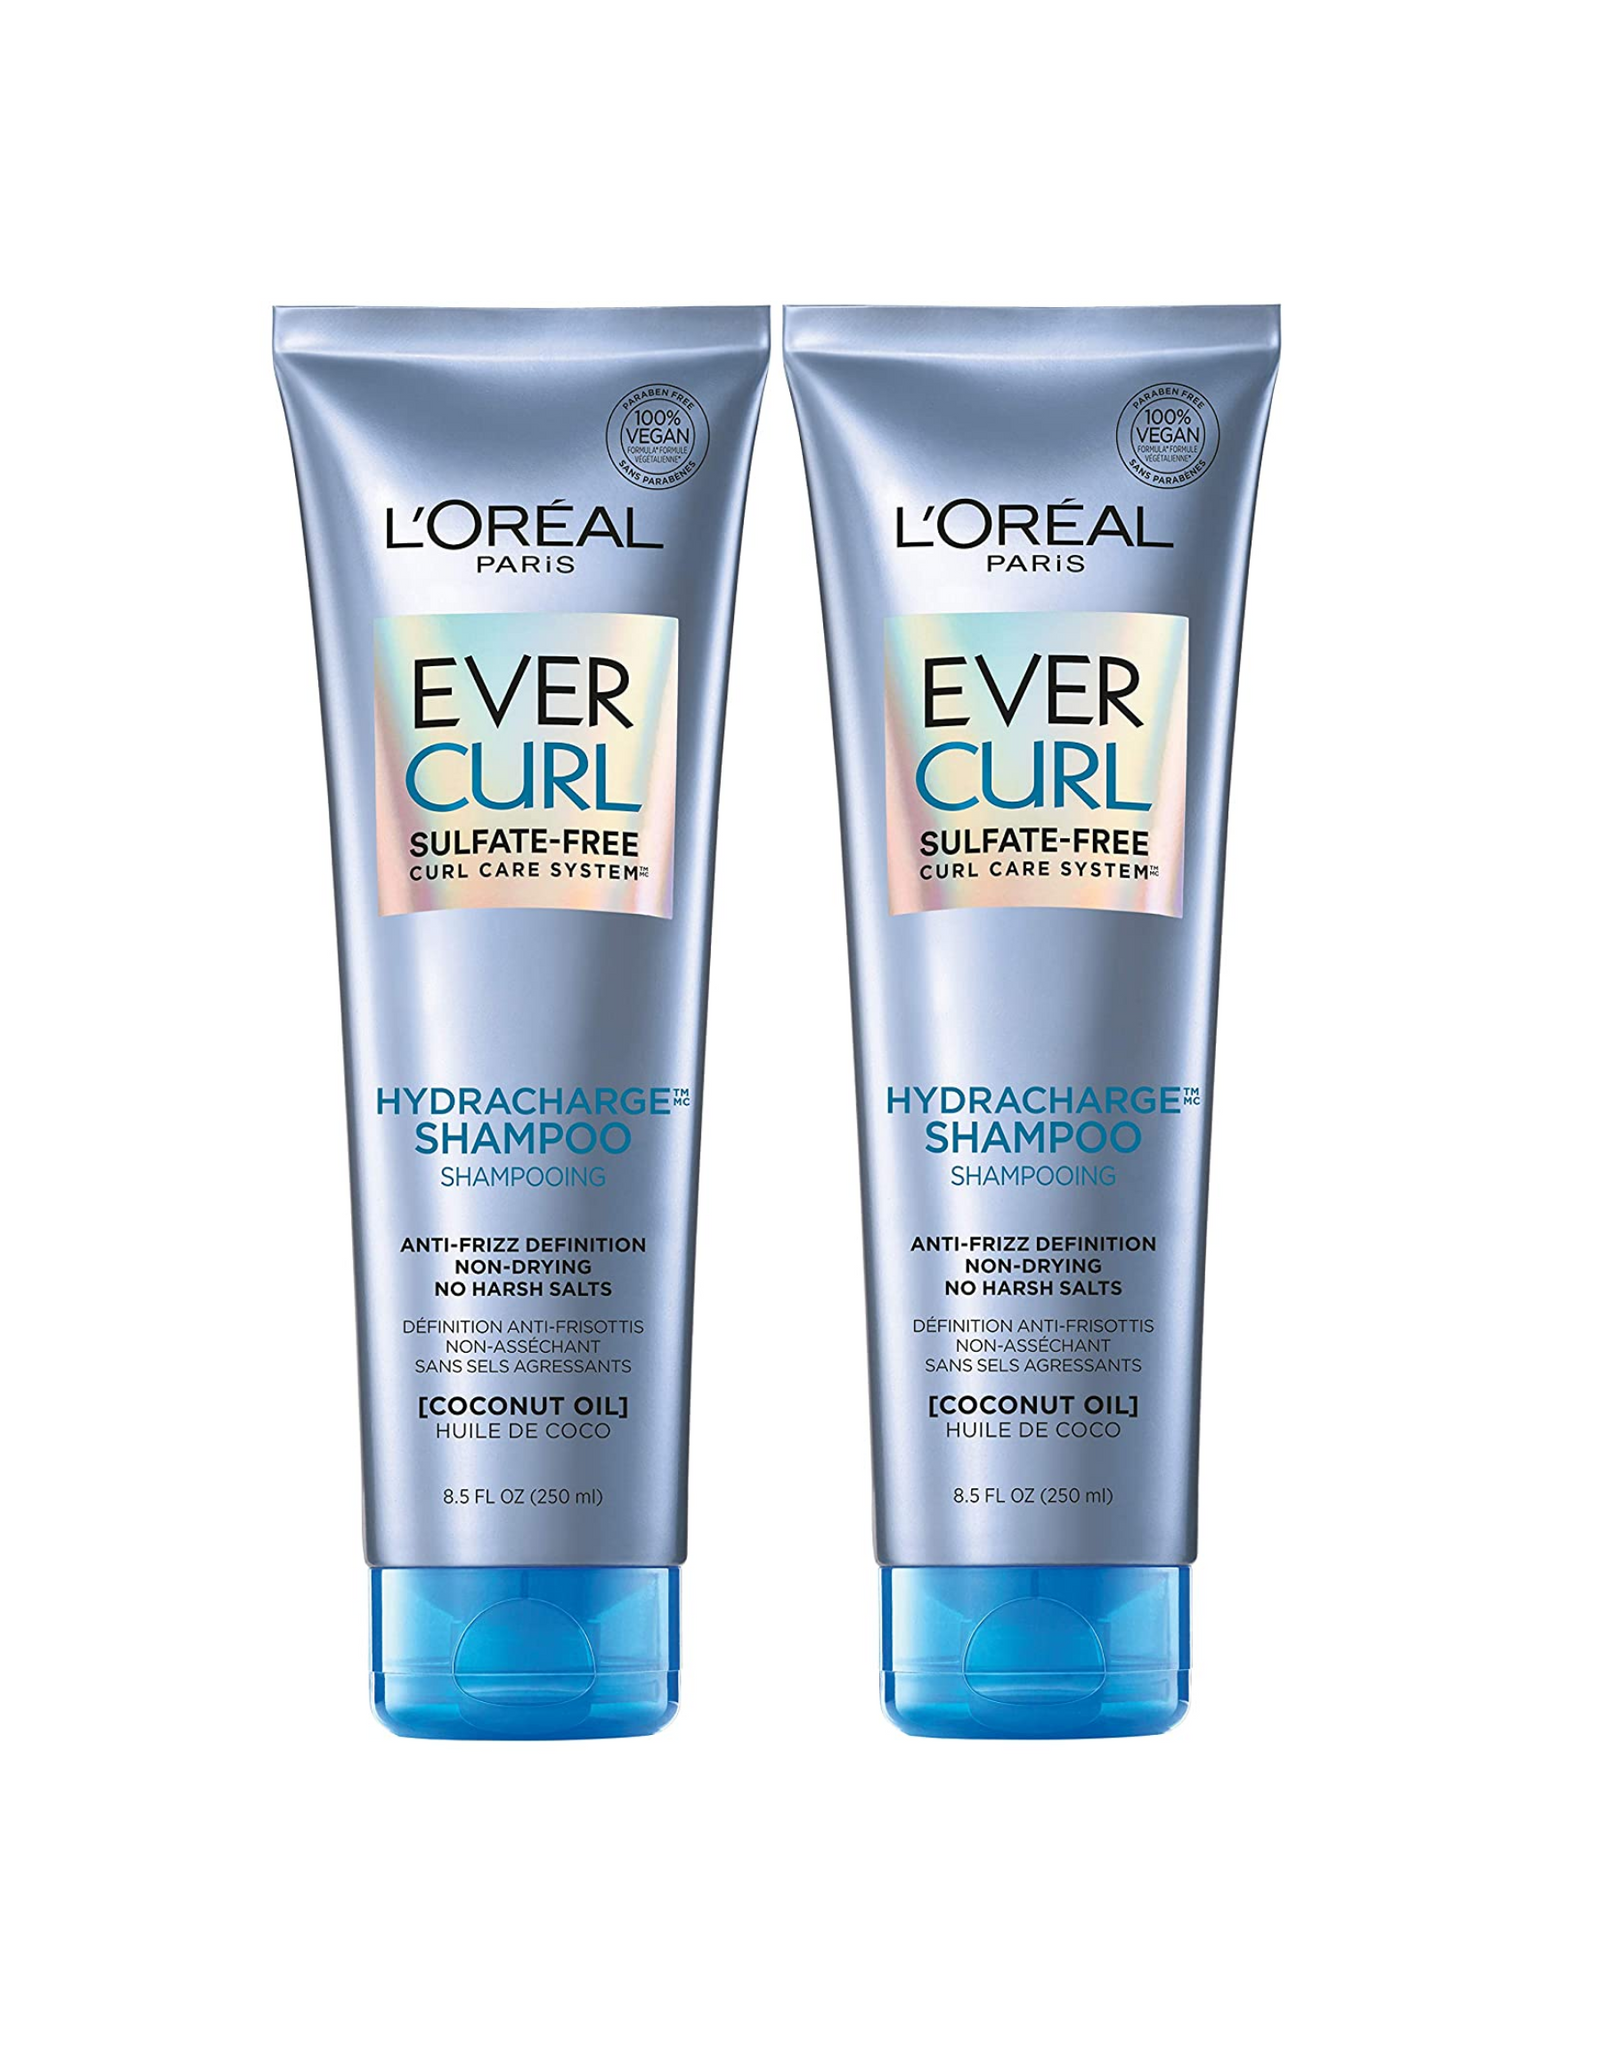 L'Oreal Paris EverCurl Sulfate Free Curl Care System Shampoo, with Coconut Oil, 8.5 fl oz each (Pack of 2)